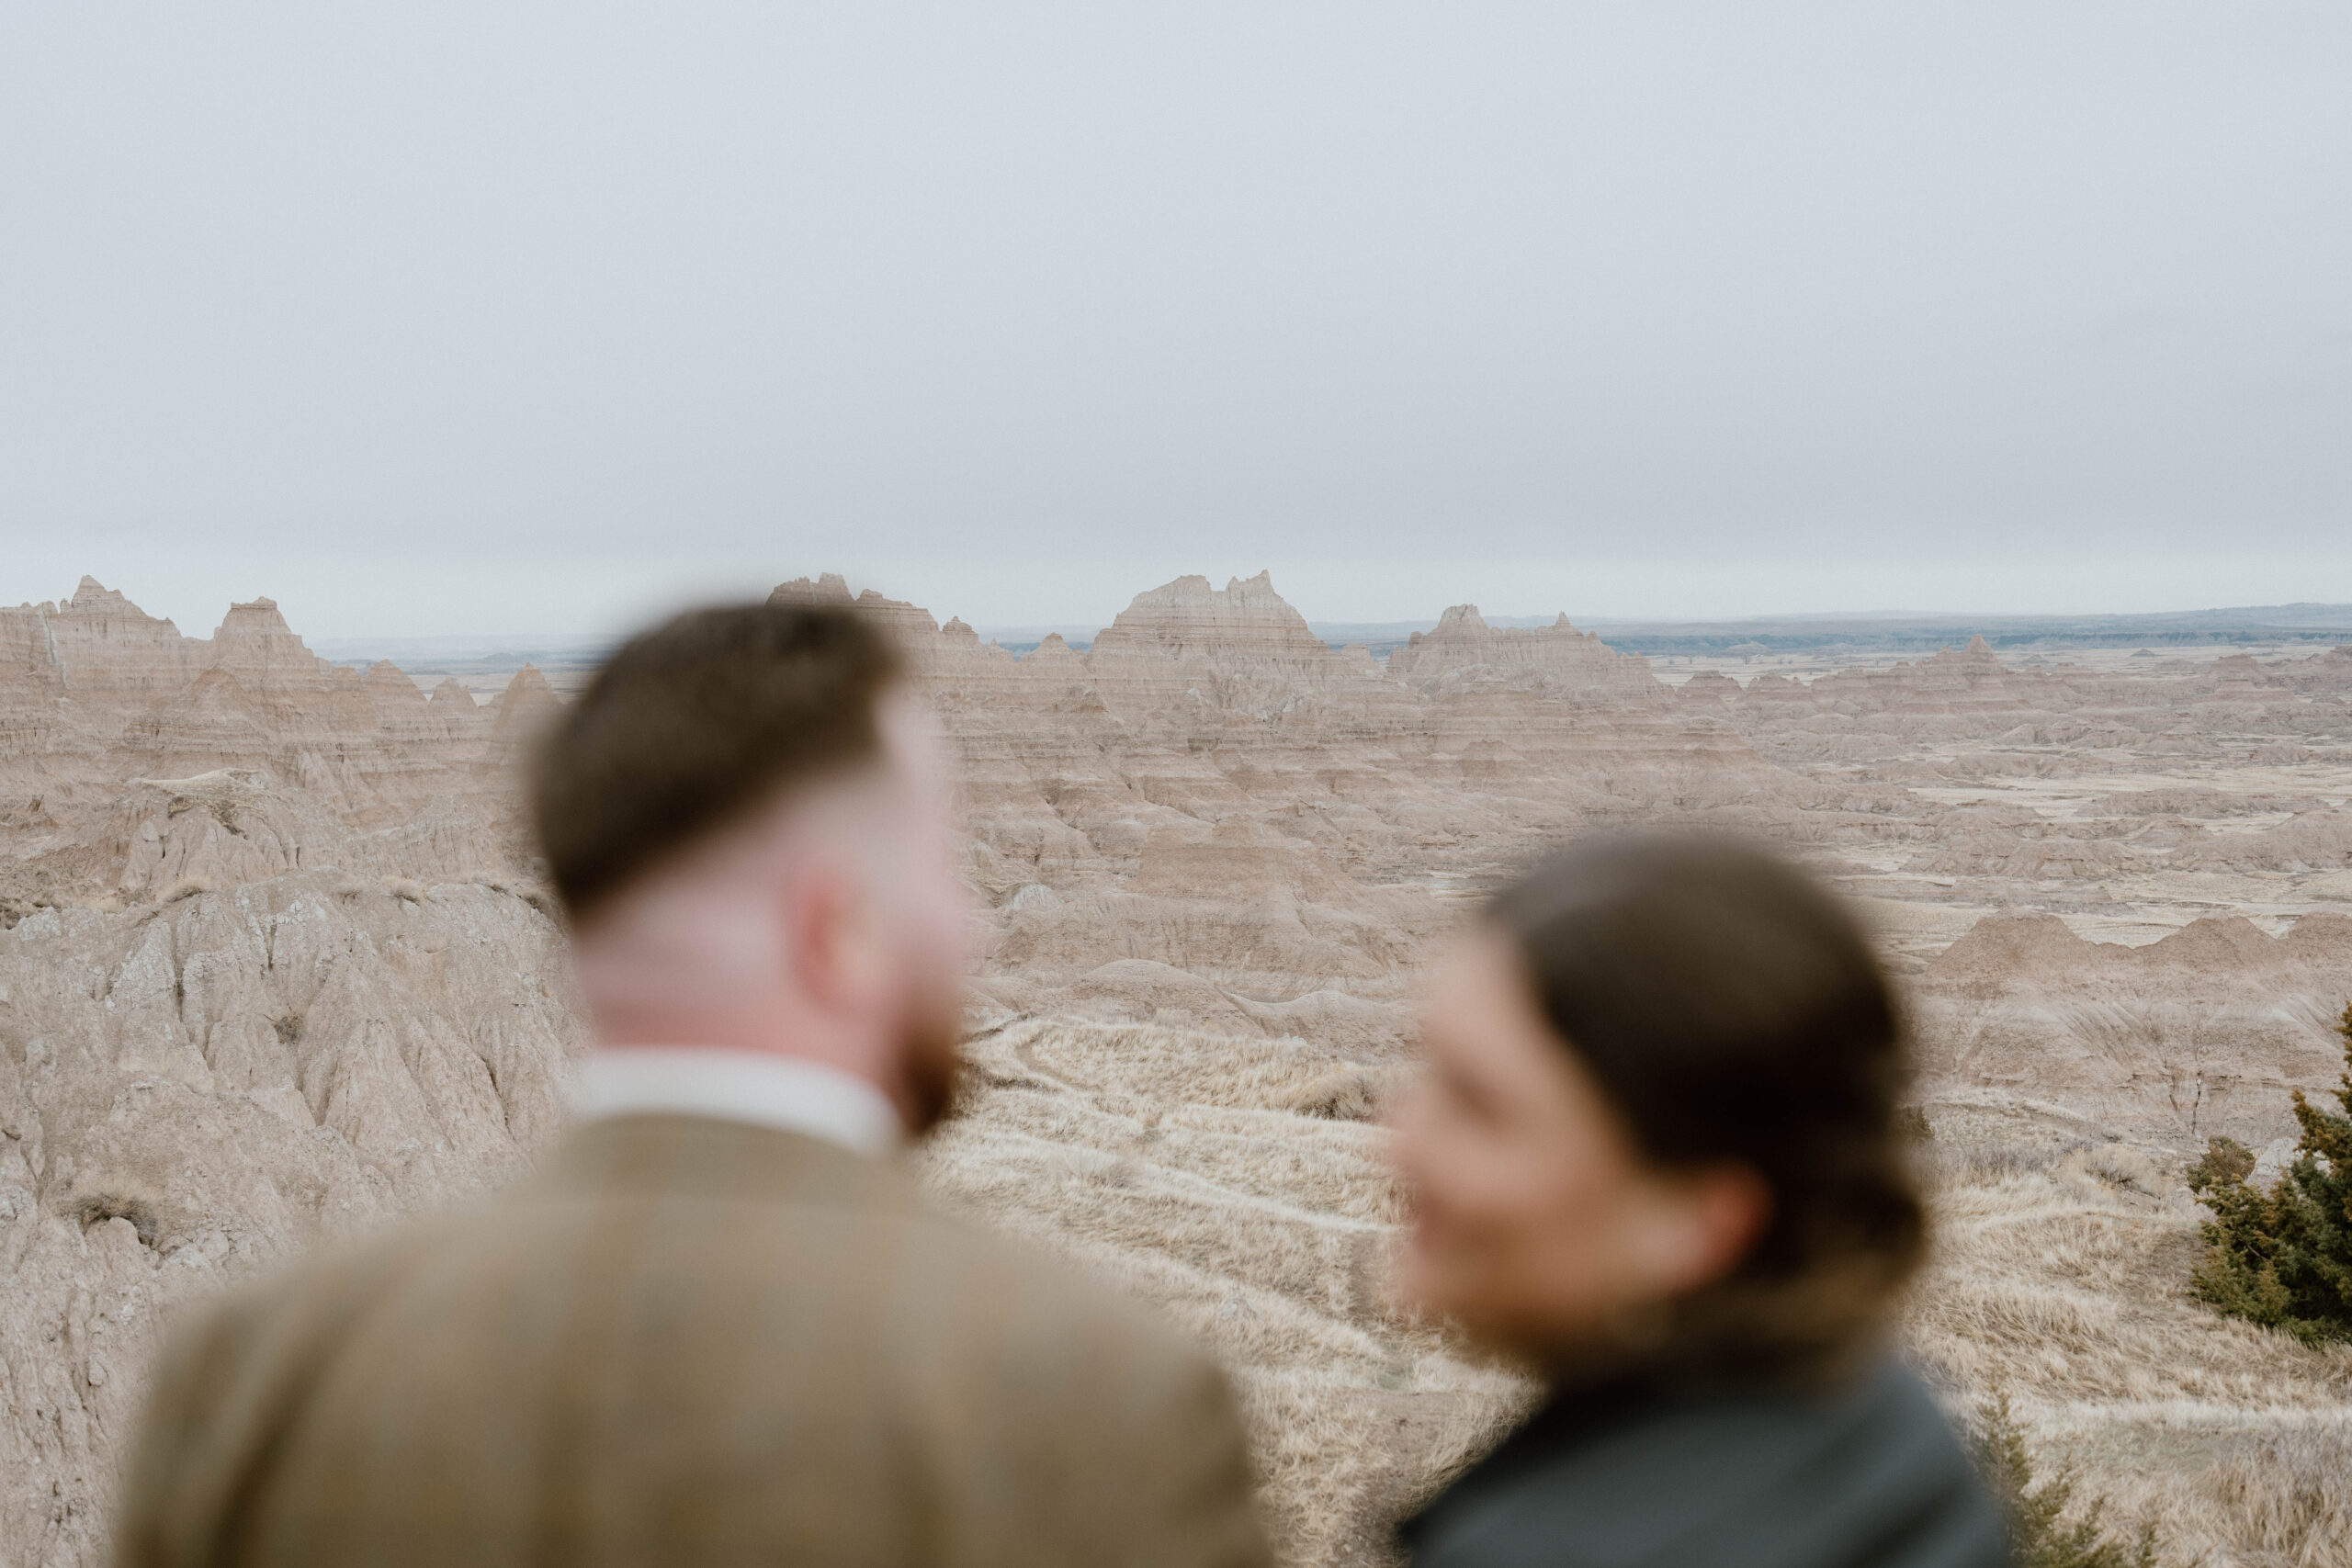 A blurry photo shows a couple in Badlands National Park